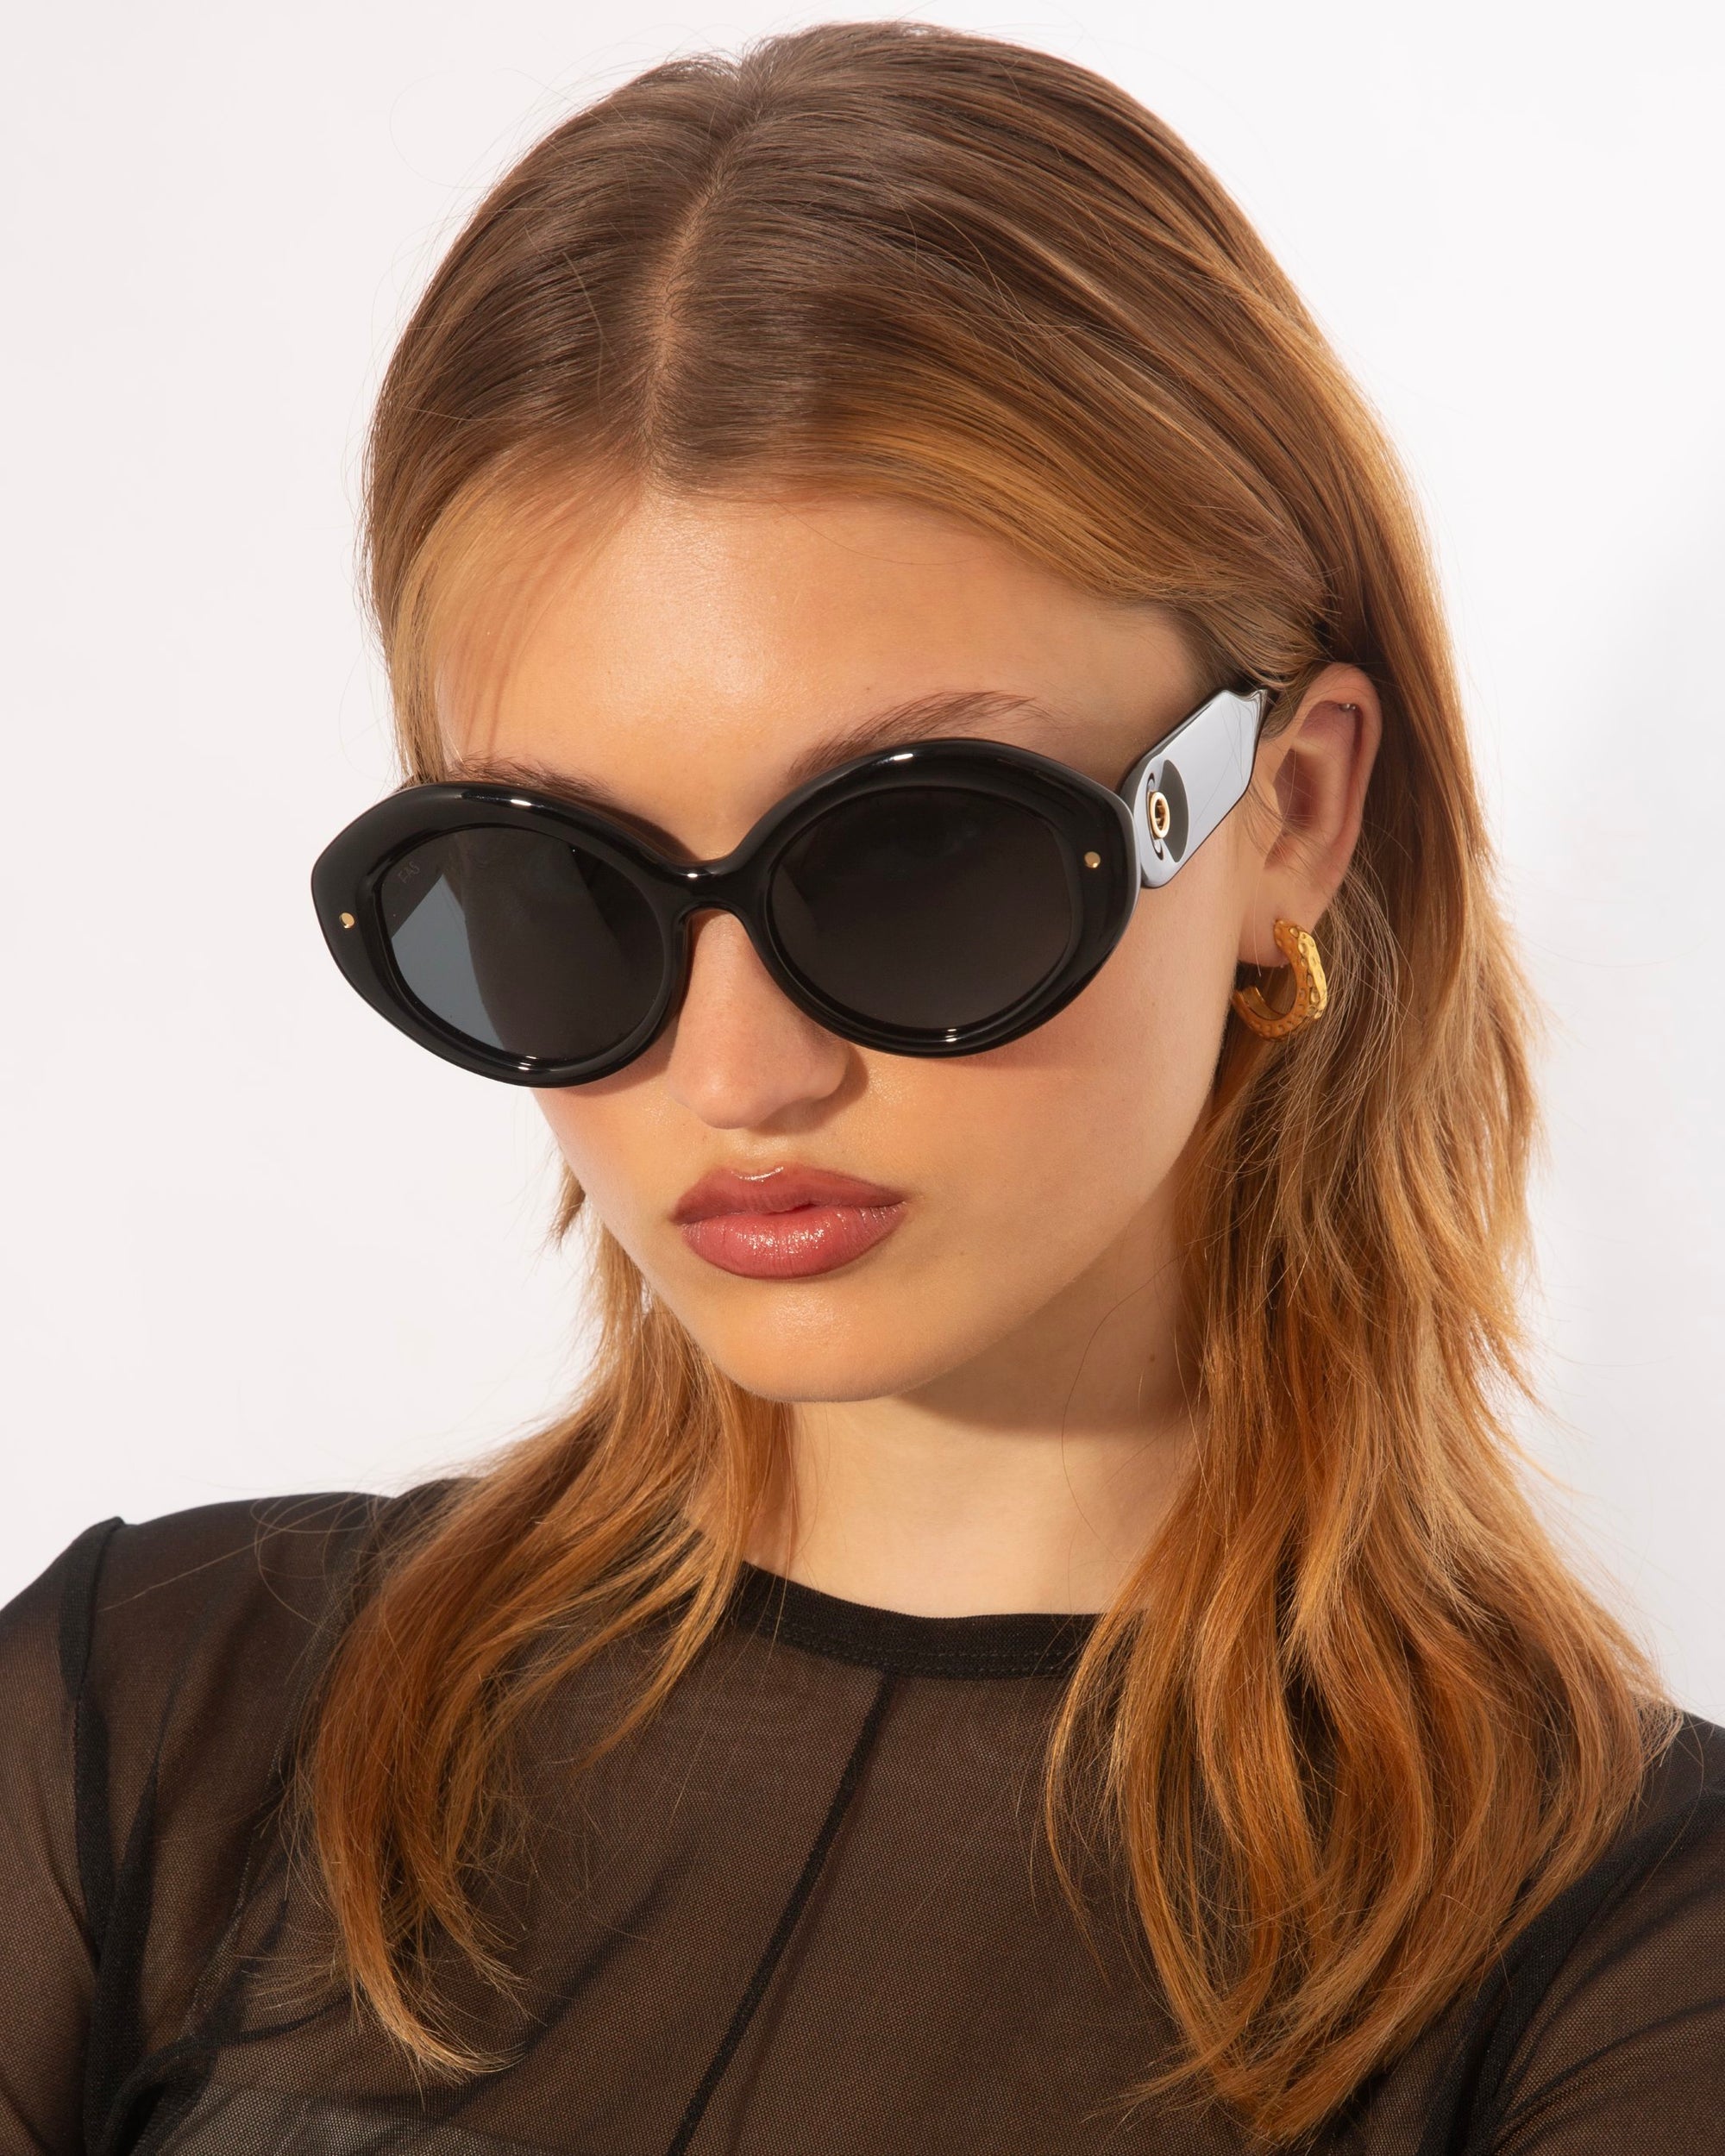 A person with auburn hair is wearing large, black oval-shaped For Art&#39;s Sake® Helios sunglasses that exude luxury eyewear vibes and gold hoop earrings. They have a calm expression and are dressed in a sheer black top. The background is plain white.